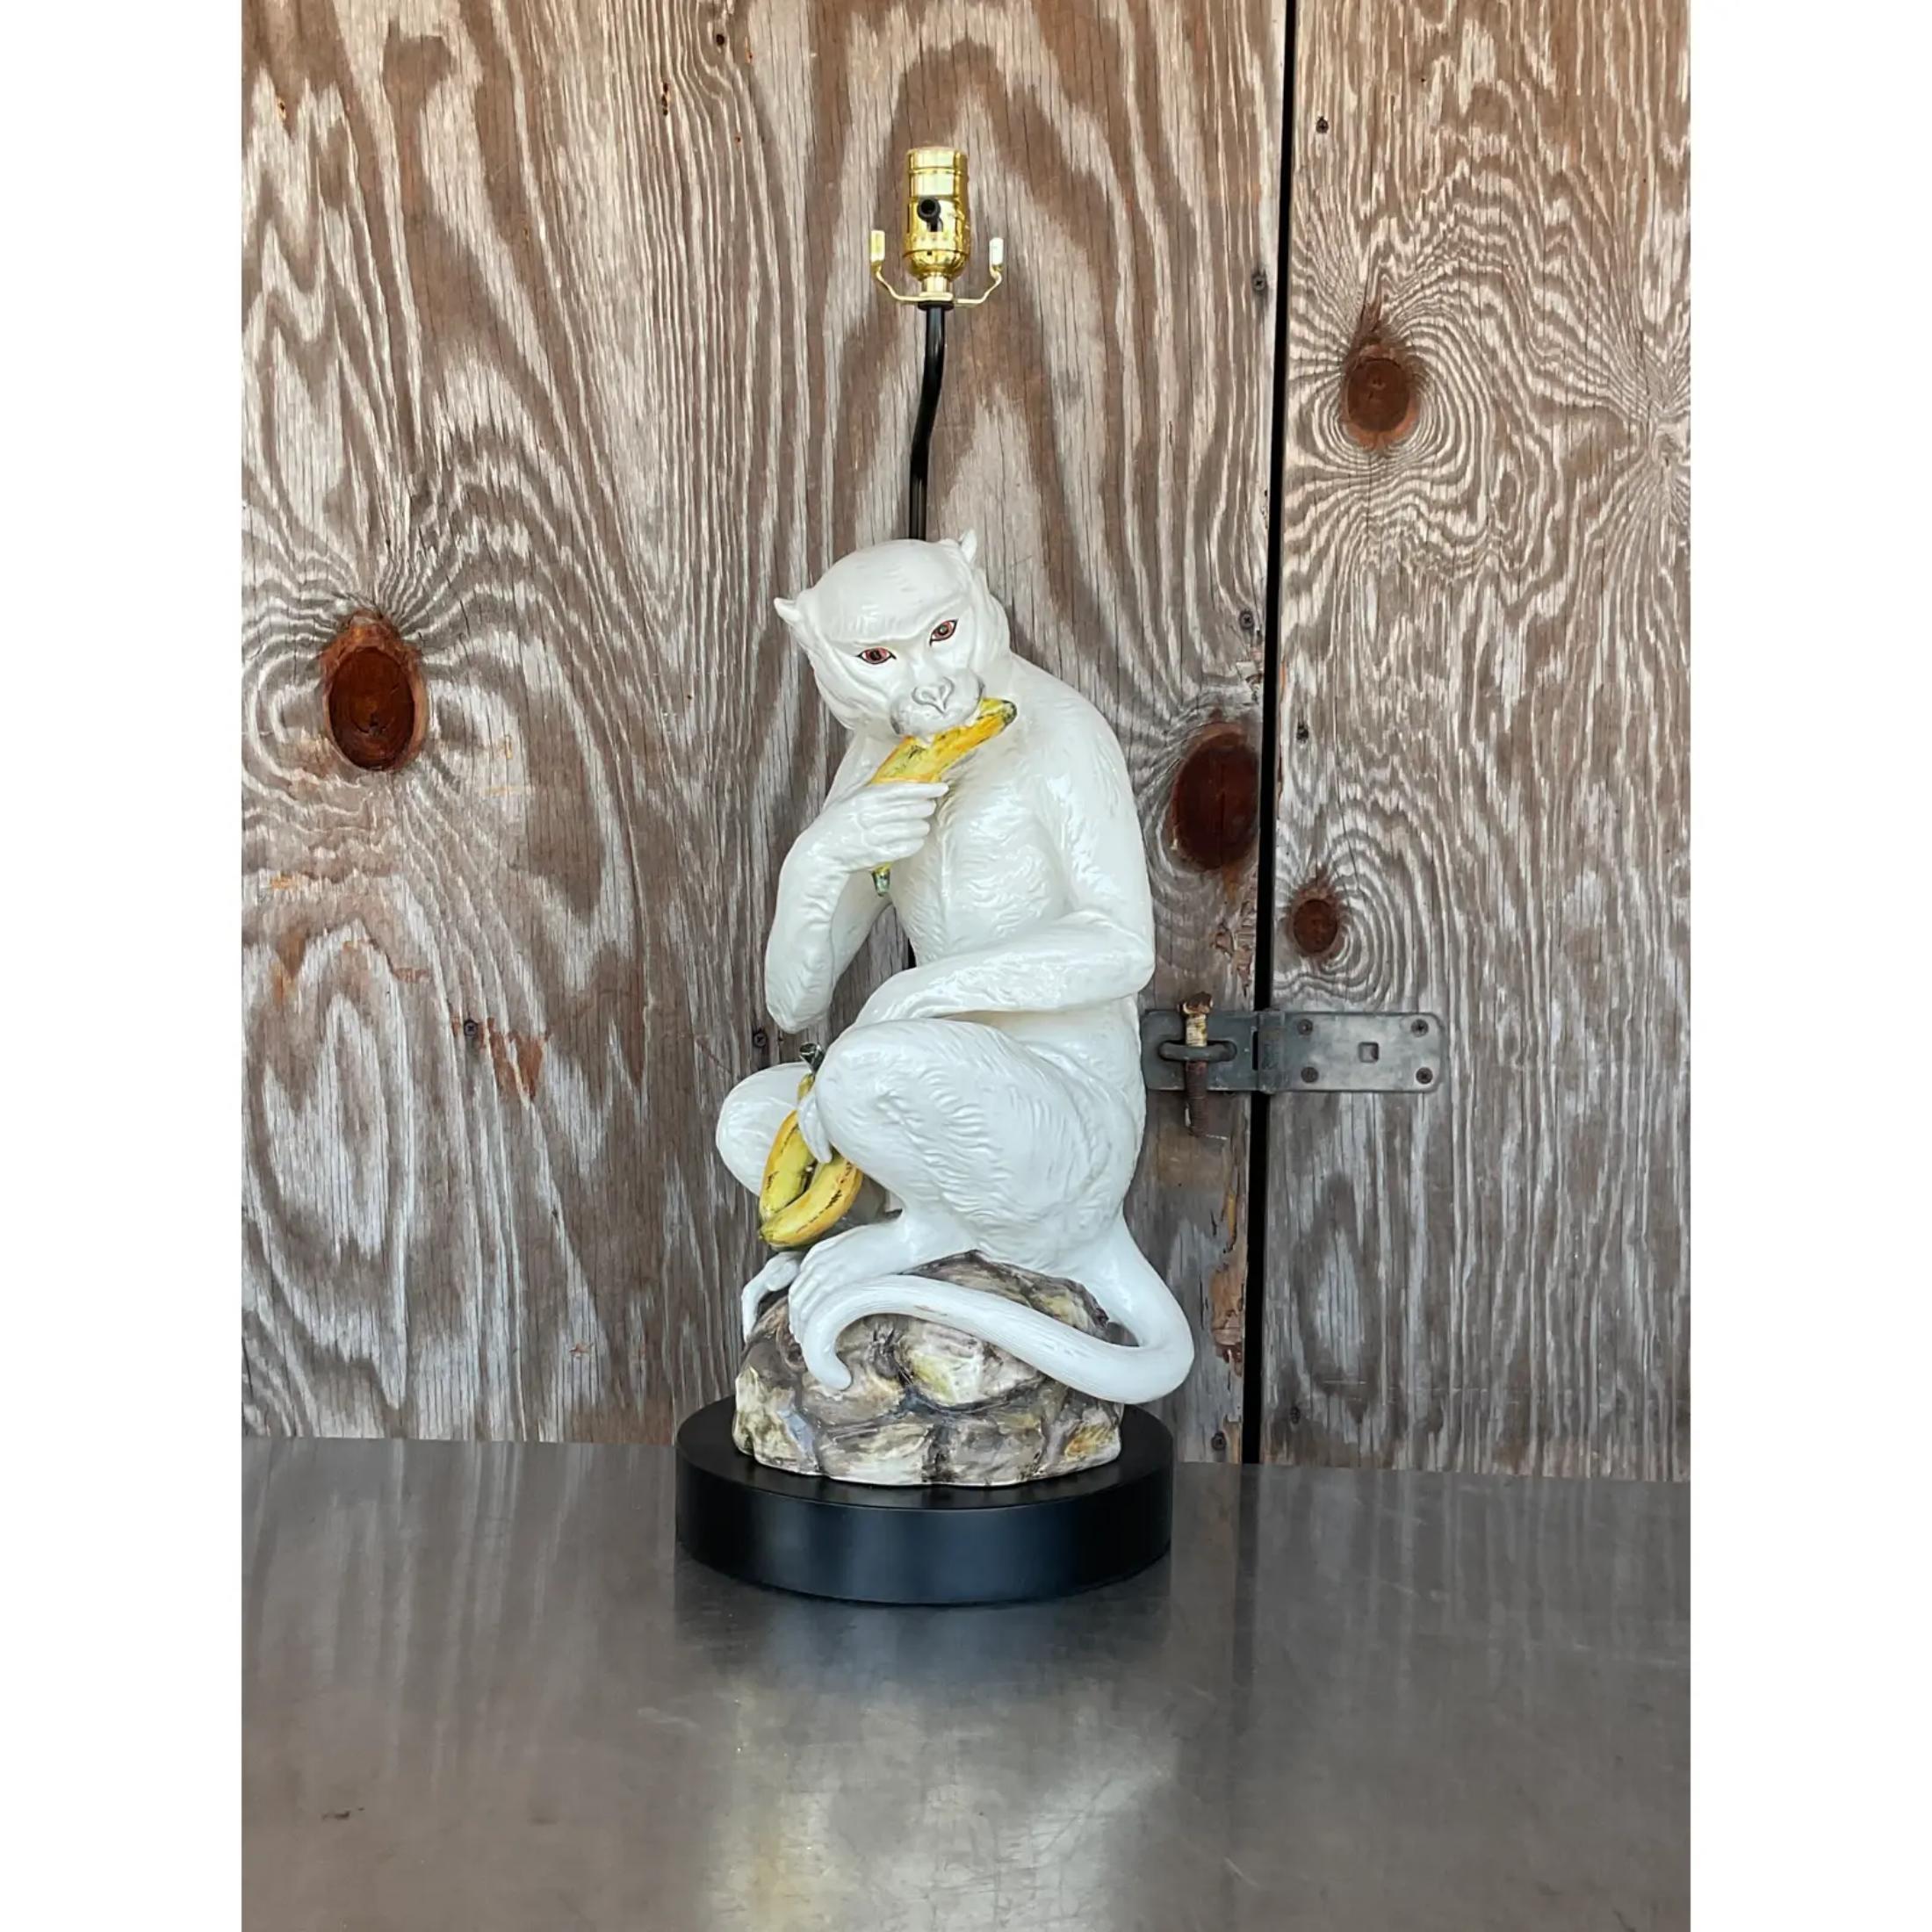 A stunning vintage Coastal table lamp. A chic Italian glazed ceramic monkey enjoying some bananas. Fully restored with all new wiring, hardware and plinth. Signed on the bottom of monkey. Acquired from a Palm Beach estate